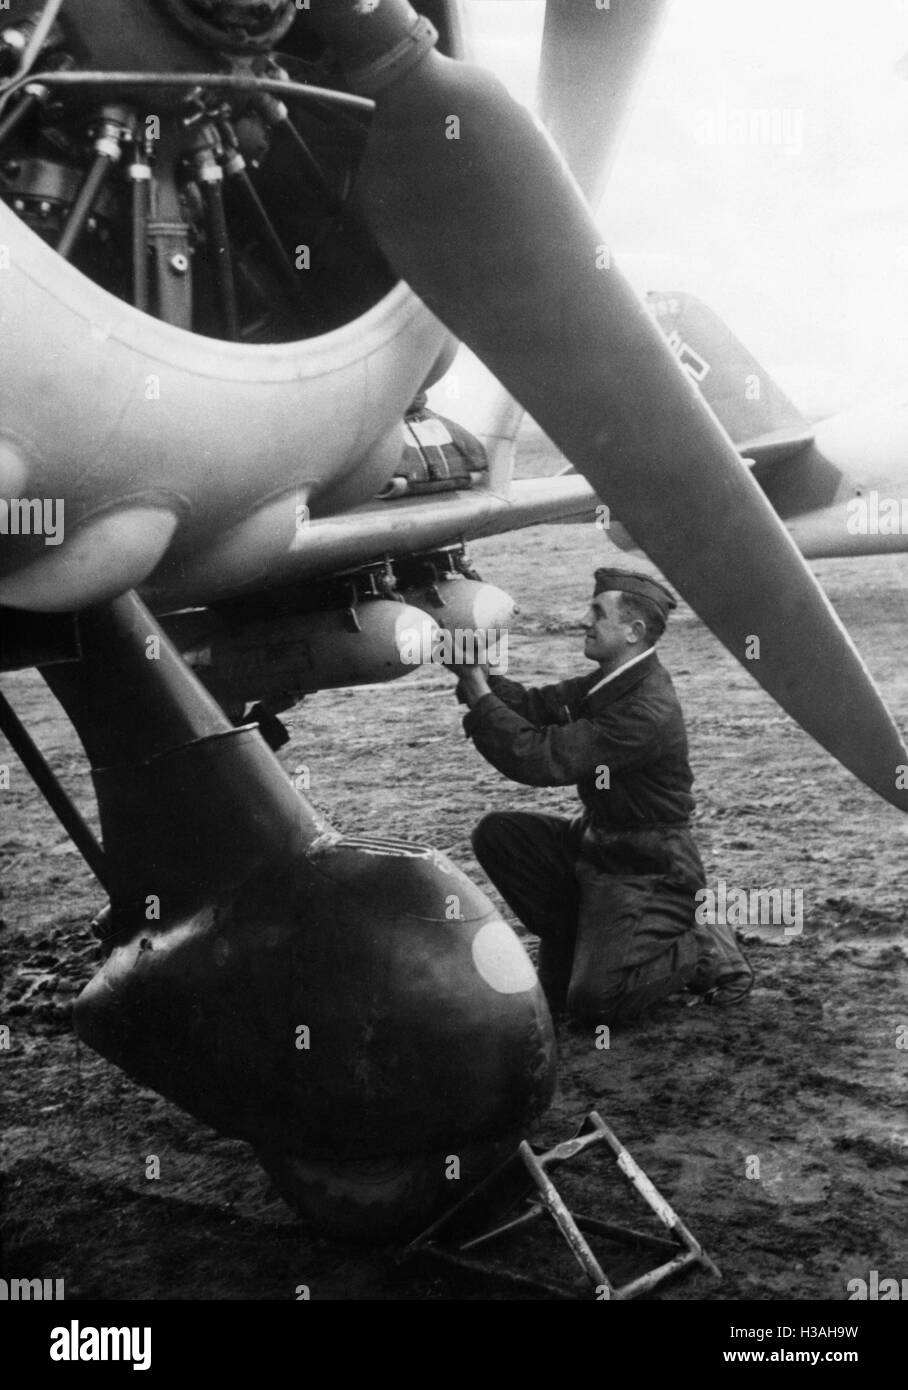 Examination of the bomb suspension of a dive bomber aircraft, 1939 Stock Photo